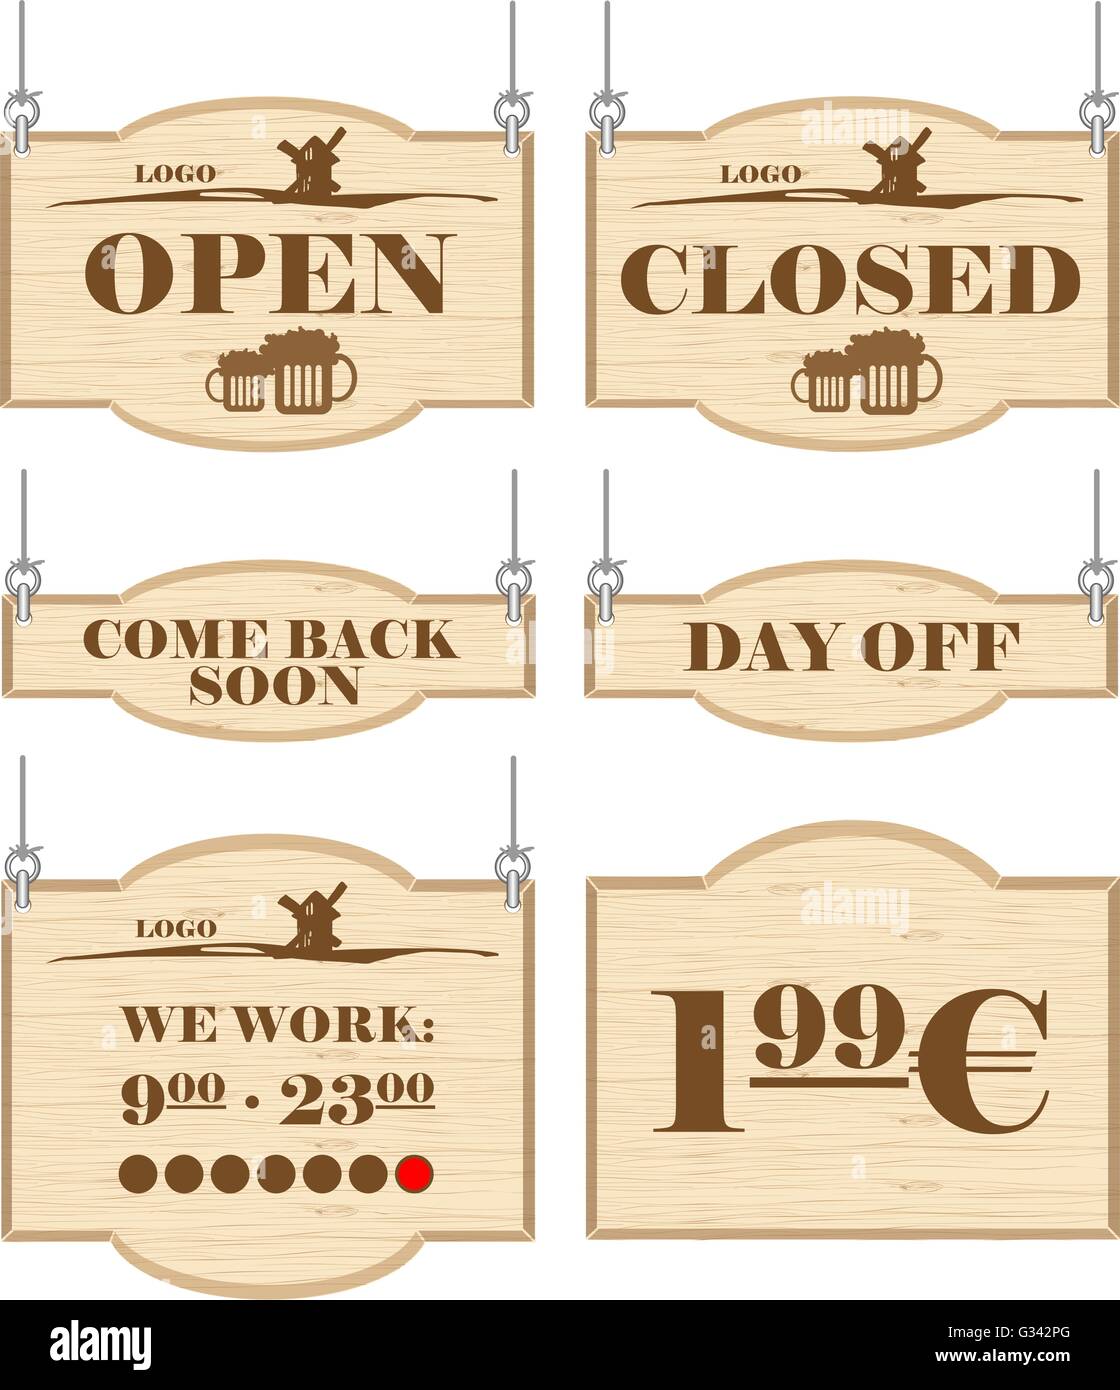 Western bar logo set collection with open, closed, day off signs in outline. Digital vector image. Stock Vector